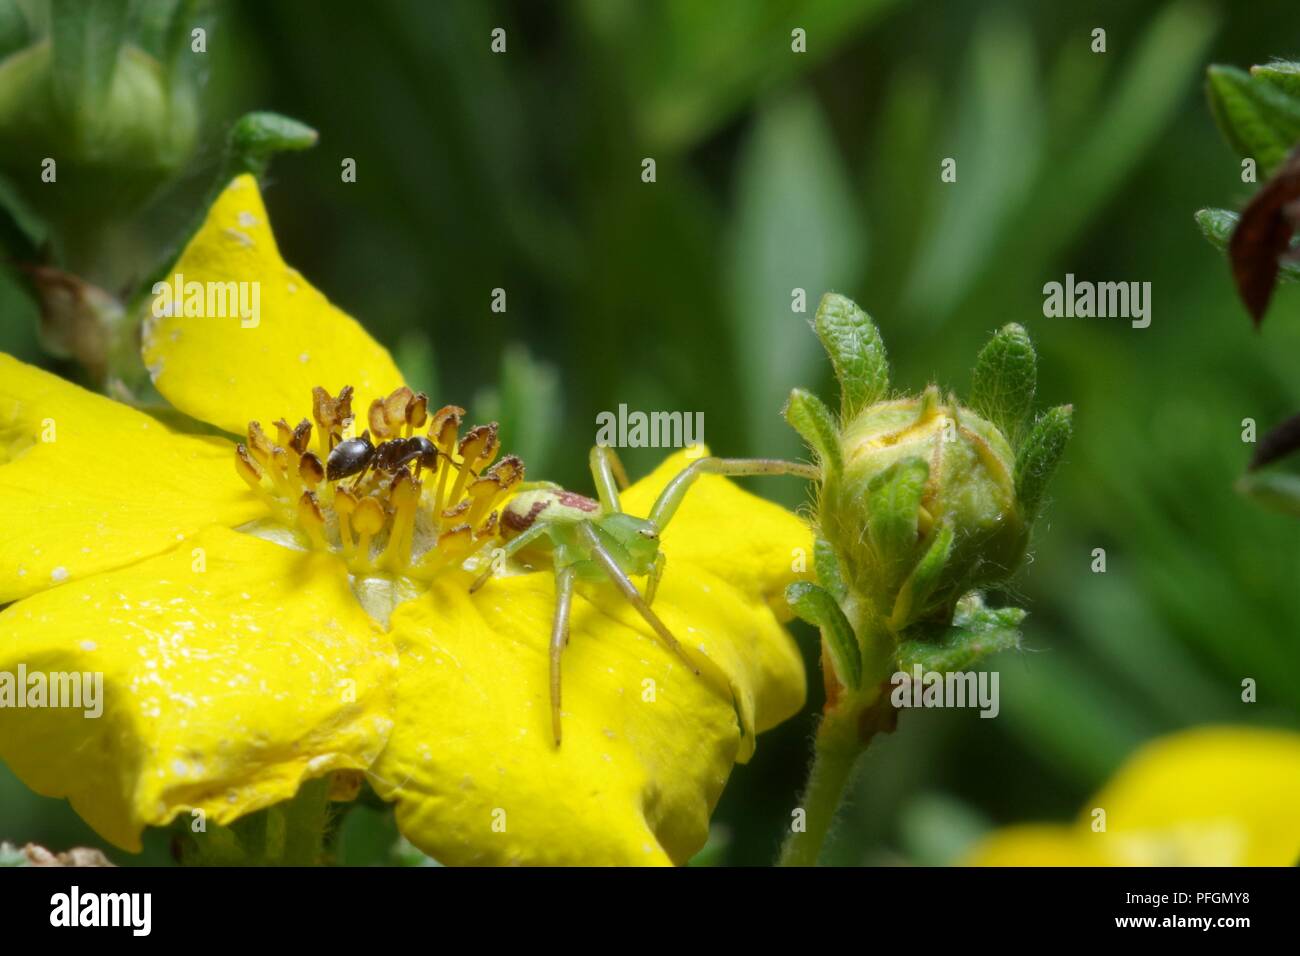 Ant and green crab spider on a yellow flower Stock Photo